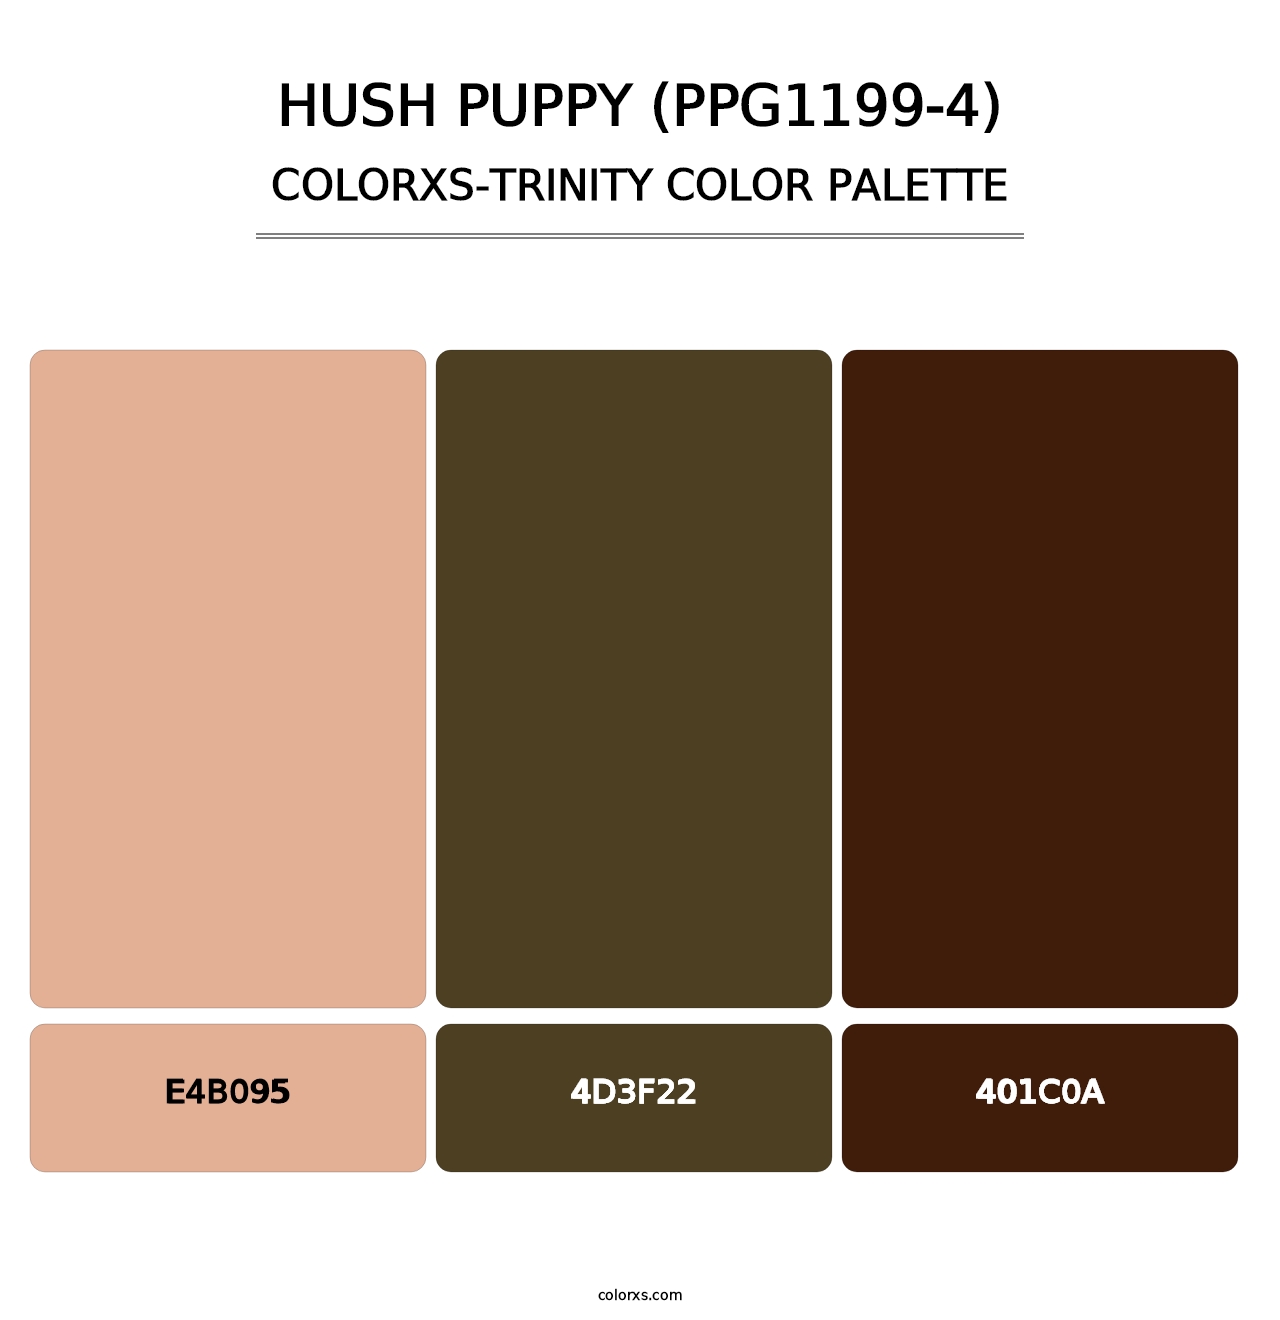 Hush Puppy (PPG1199-4) - Colorxs Trinity Palette